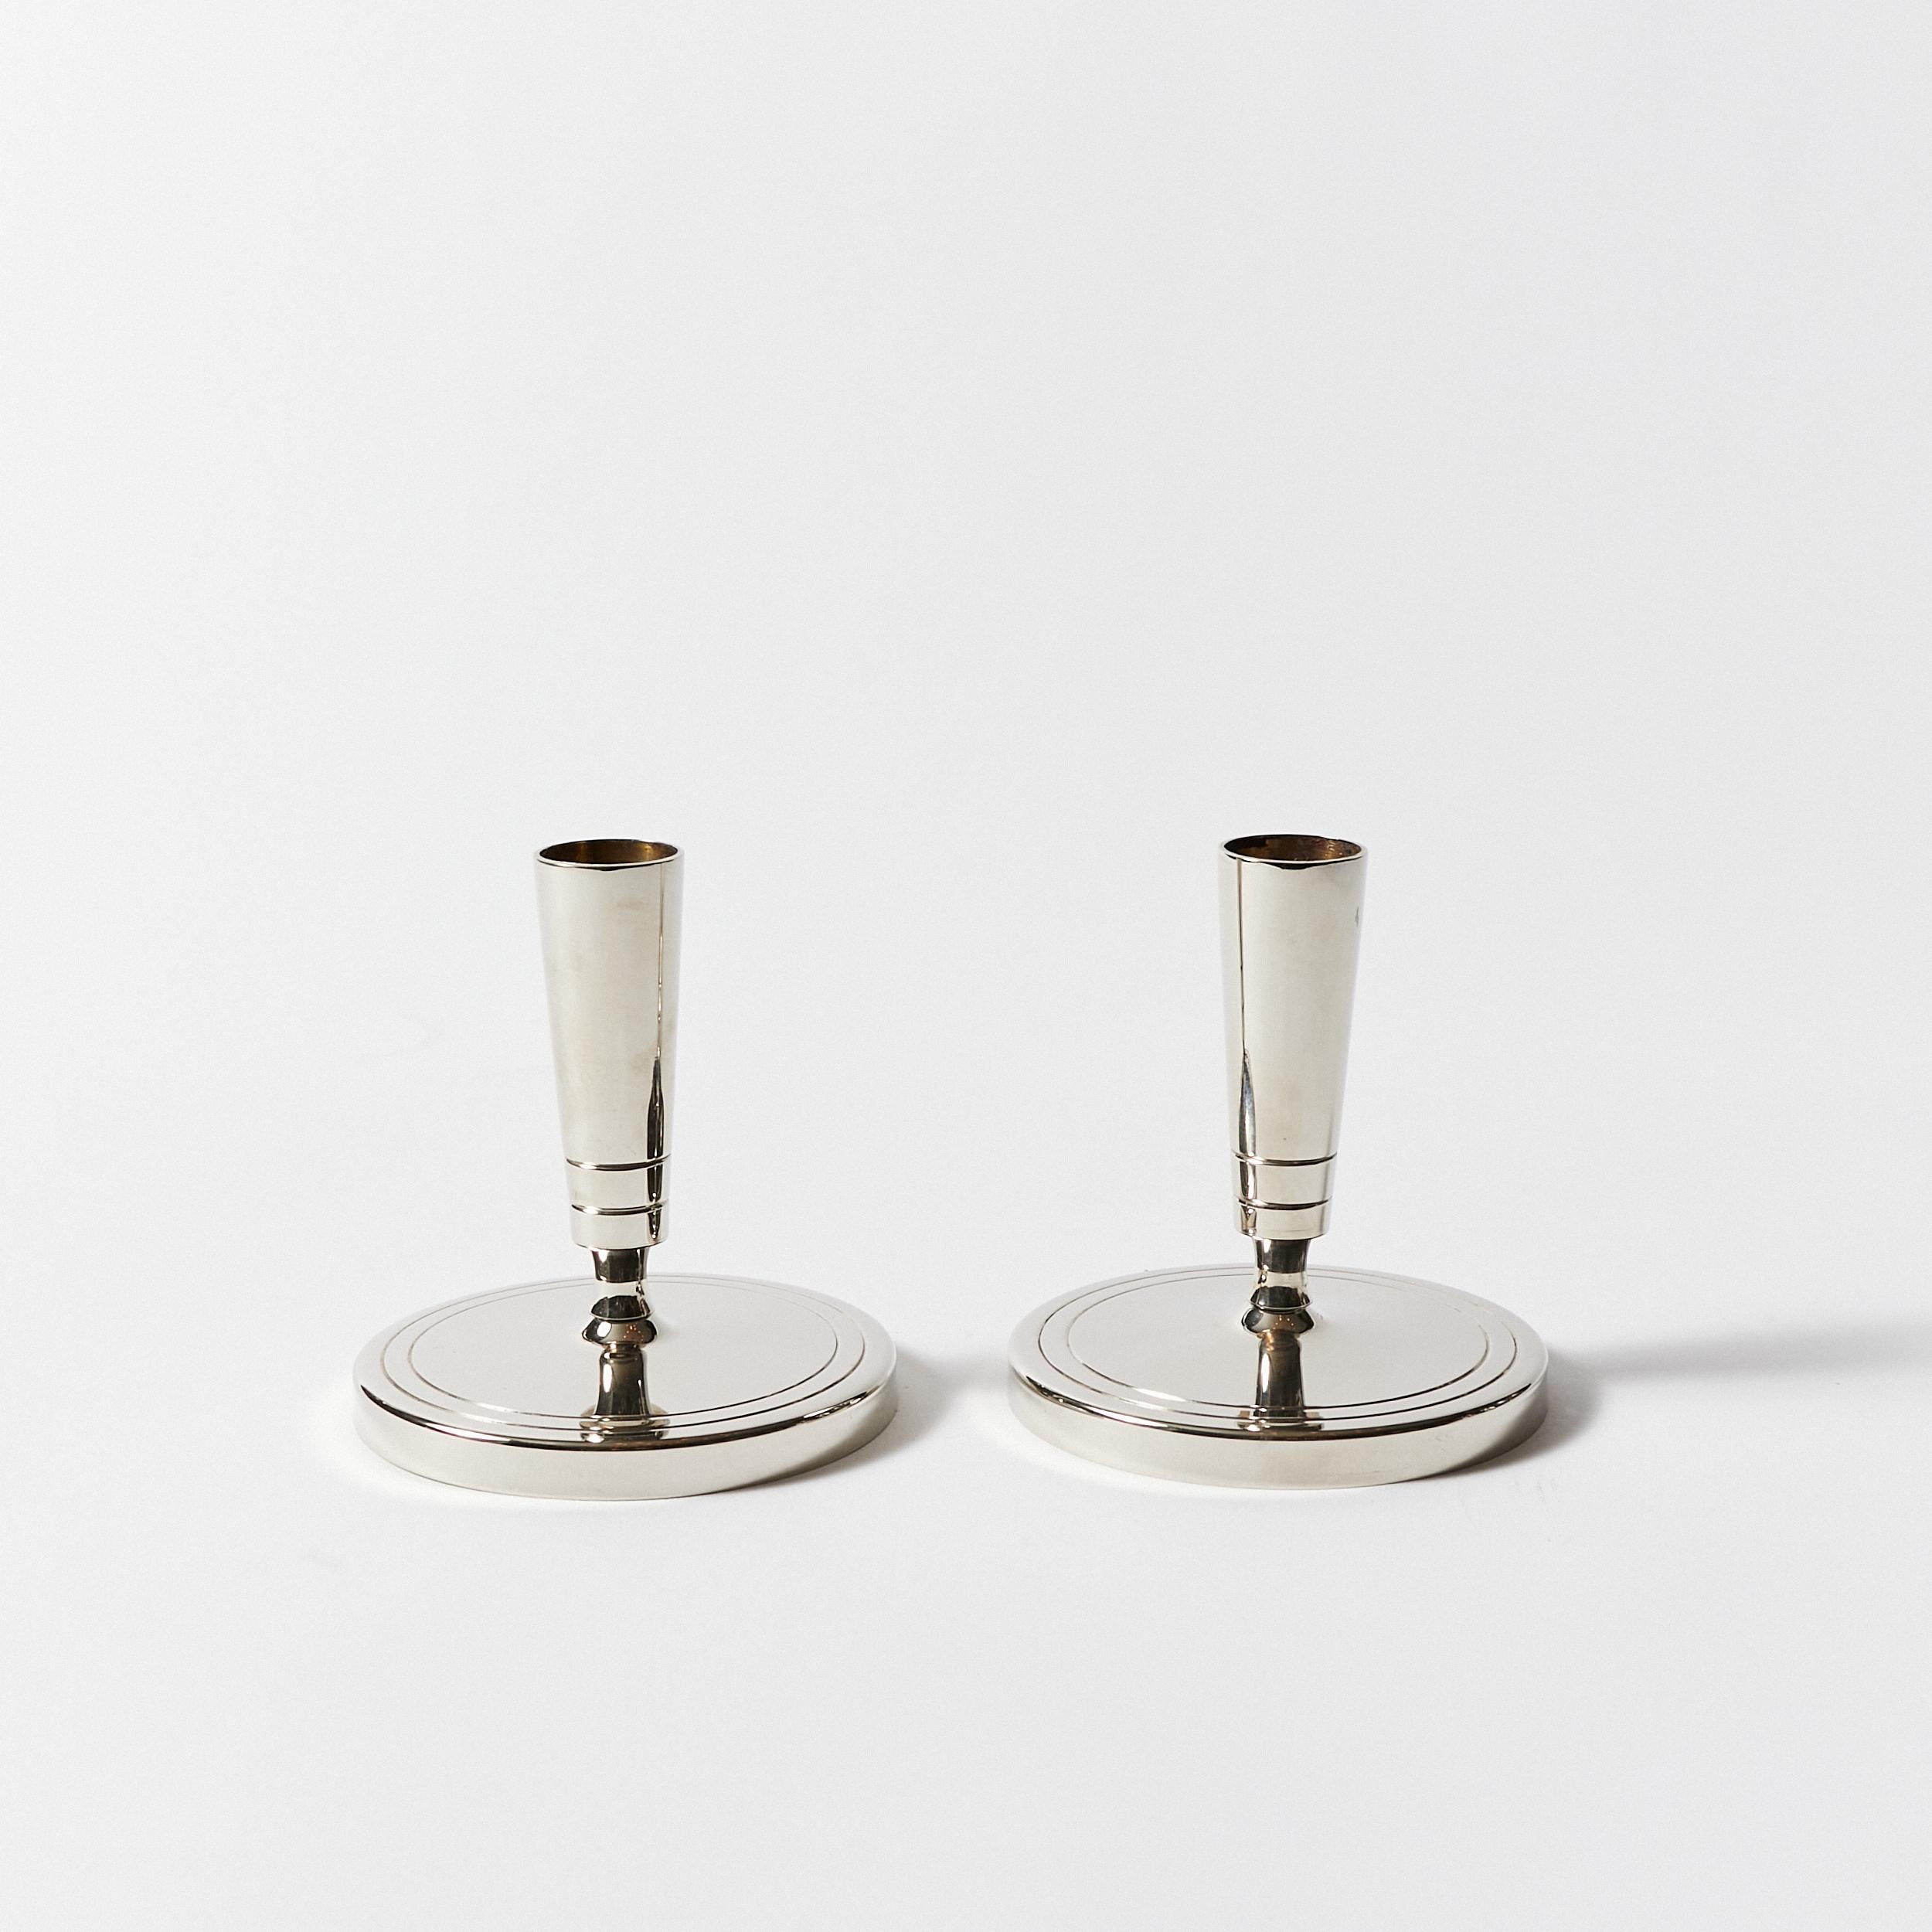 Set of two polished nickel candlesticks with a circular base and sinuous stem designed by Tommi Parzinger for Dorlyn Silversmiths.